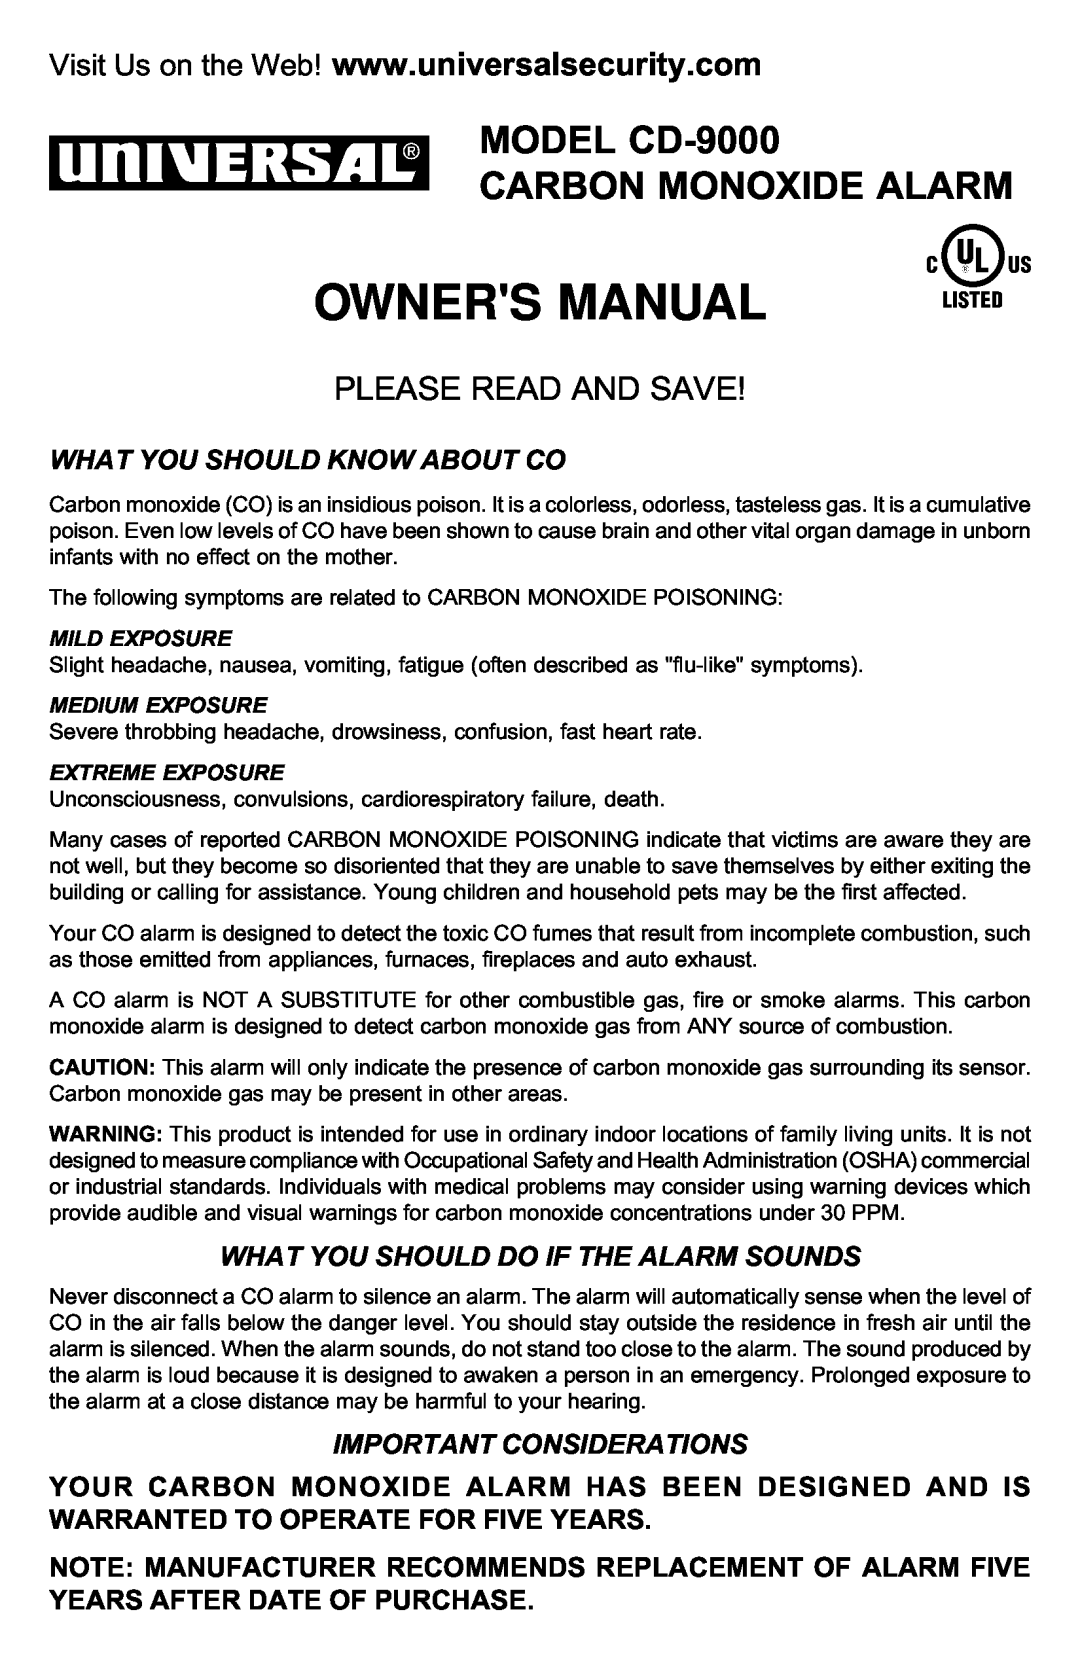 Universal Security Instruments CD-9000 owner manual What You Should Know About Co, What You Should Do If The Alarm Sounds 